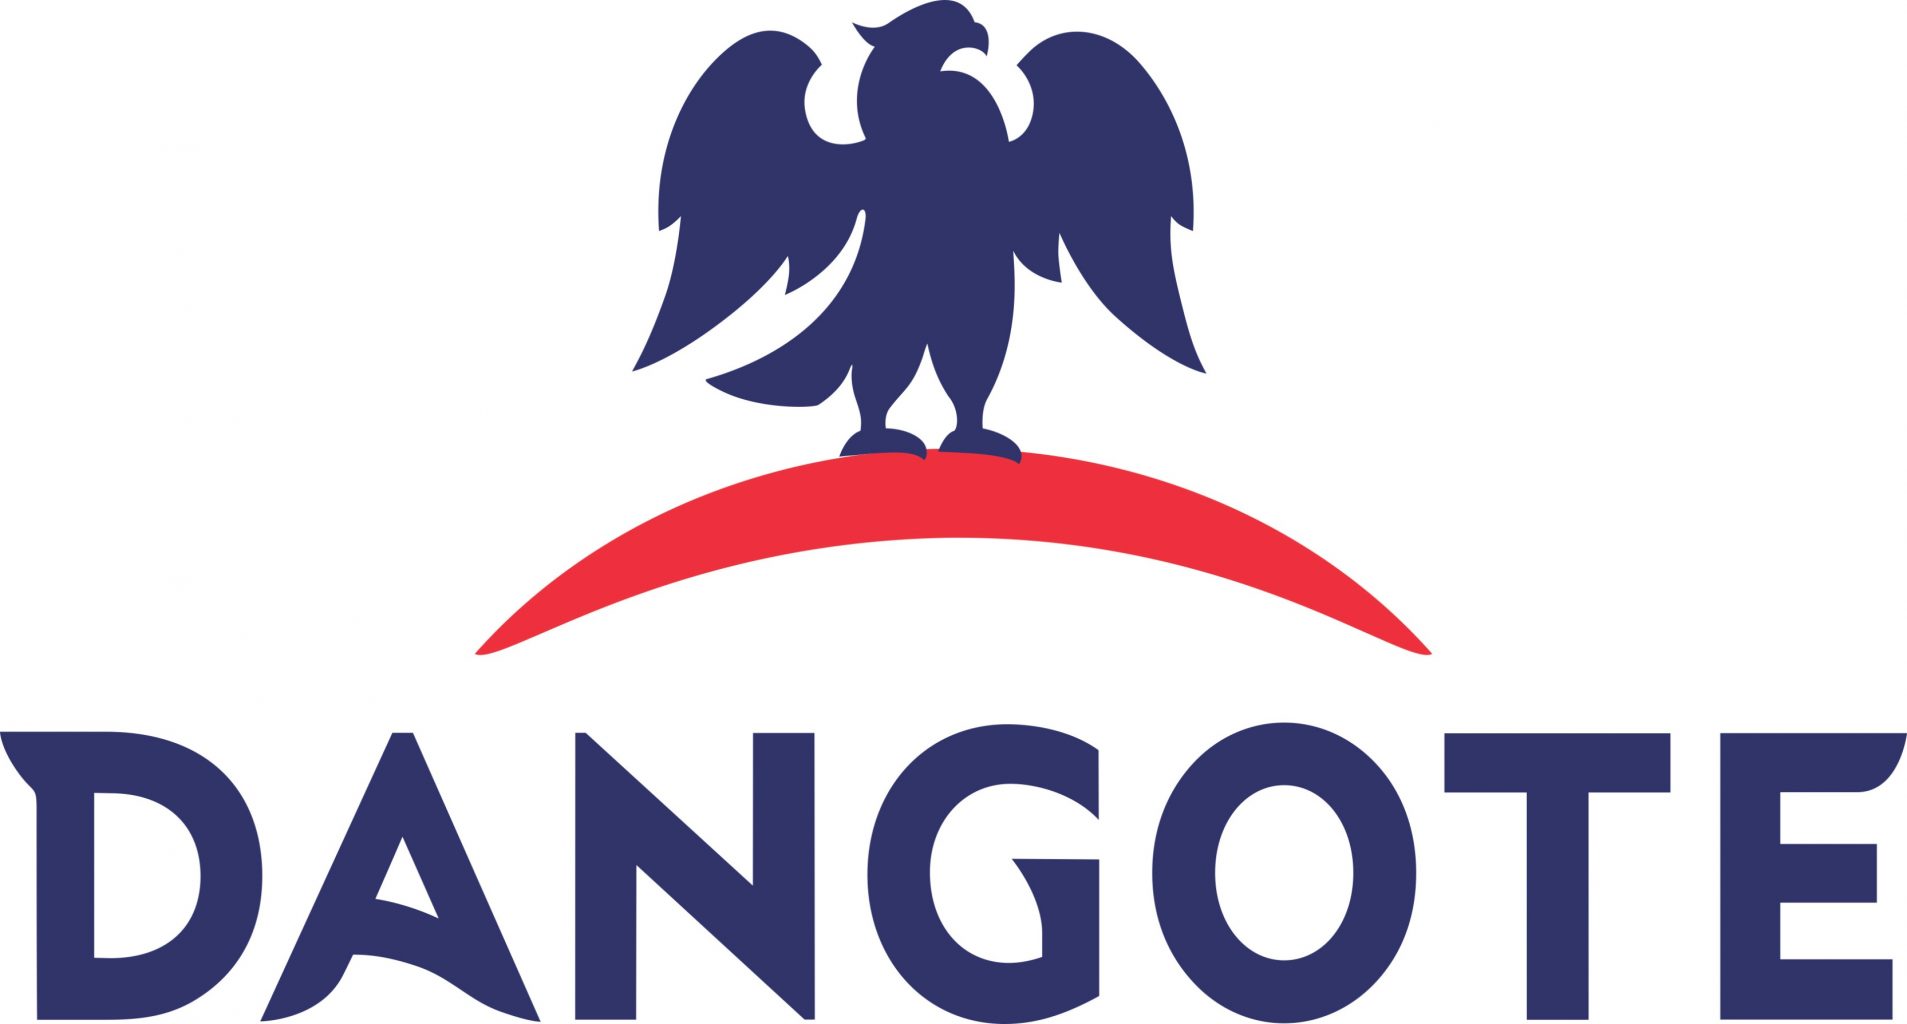 Apply for massive Dangote recruitment 2022 for NCE, OND, HND, Bsc (19 Positions)